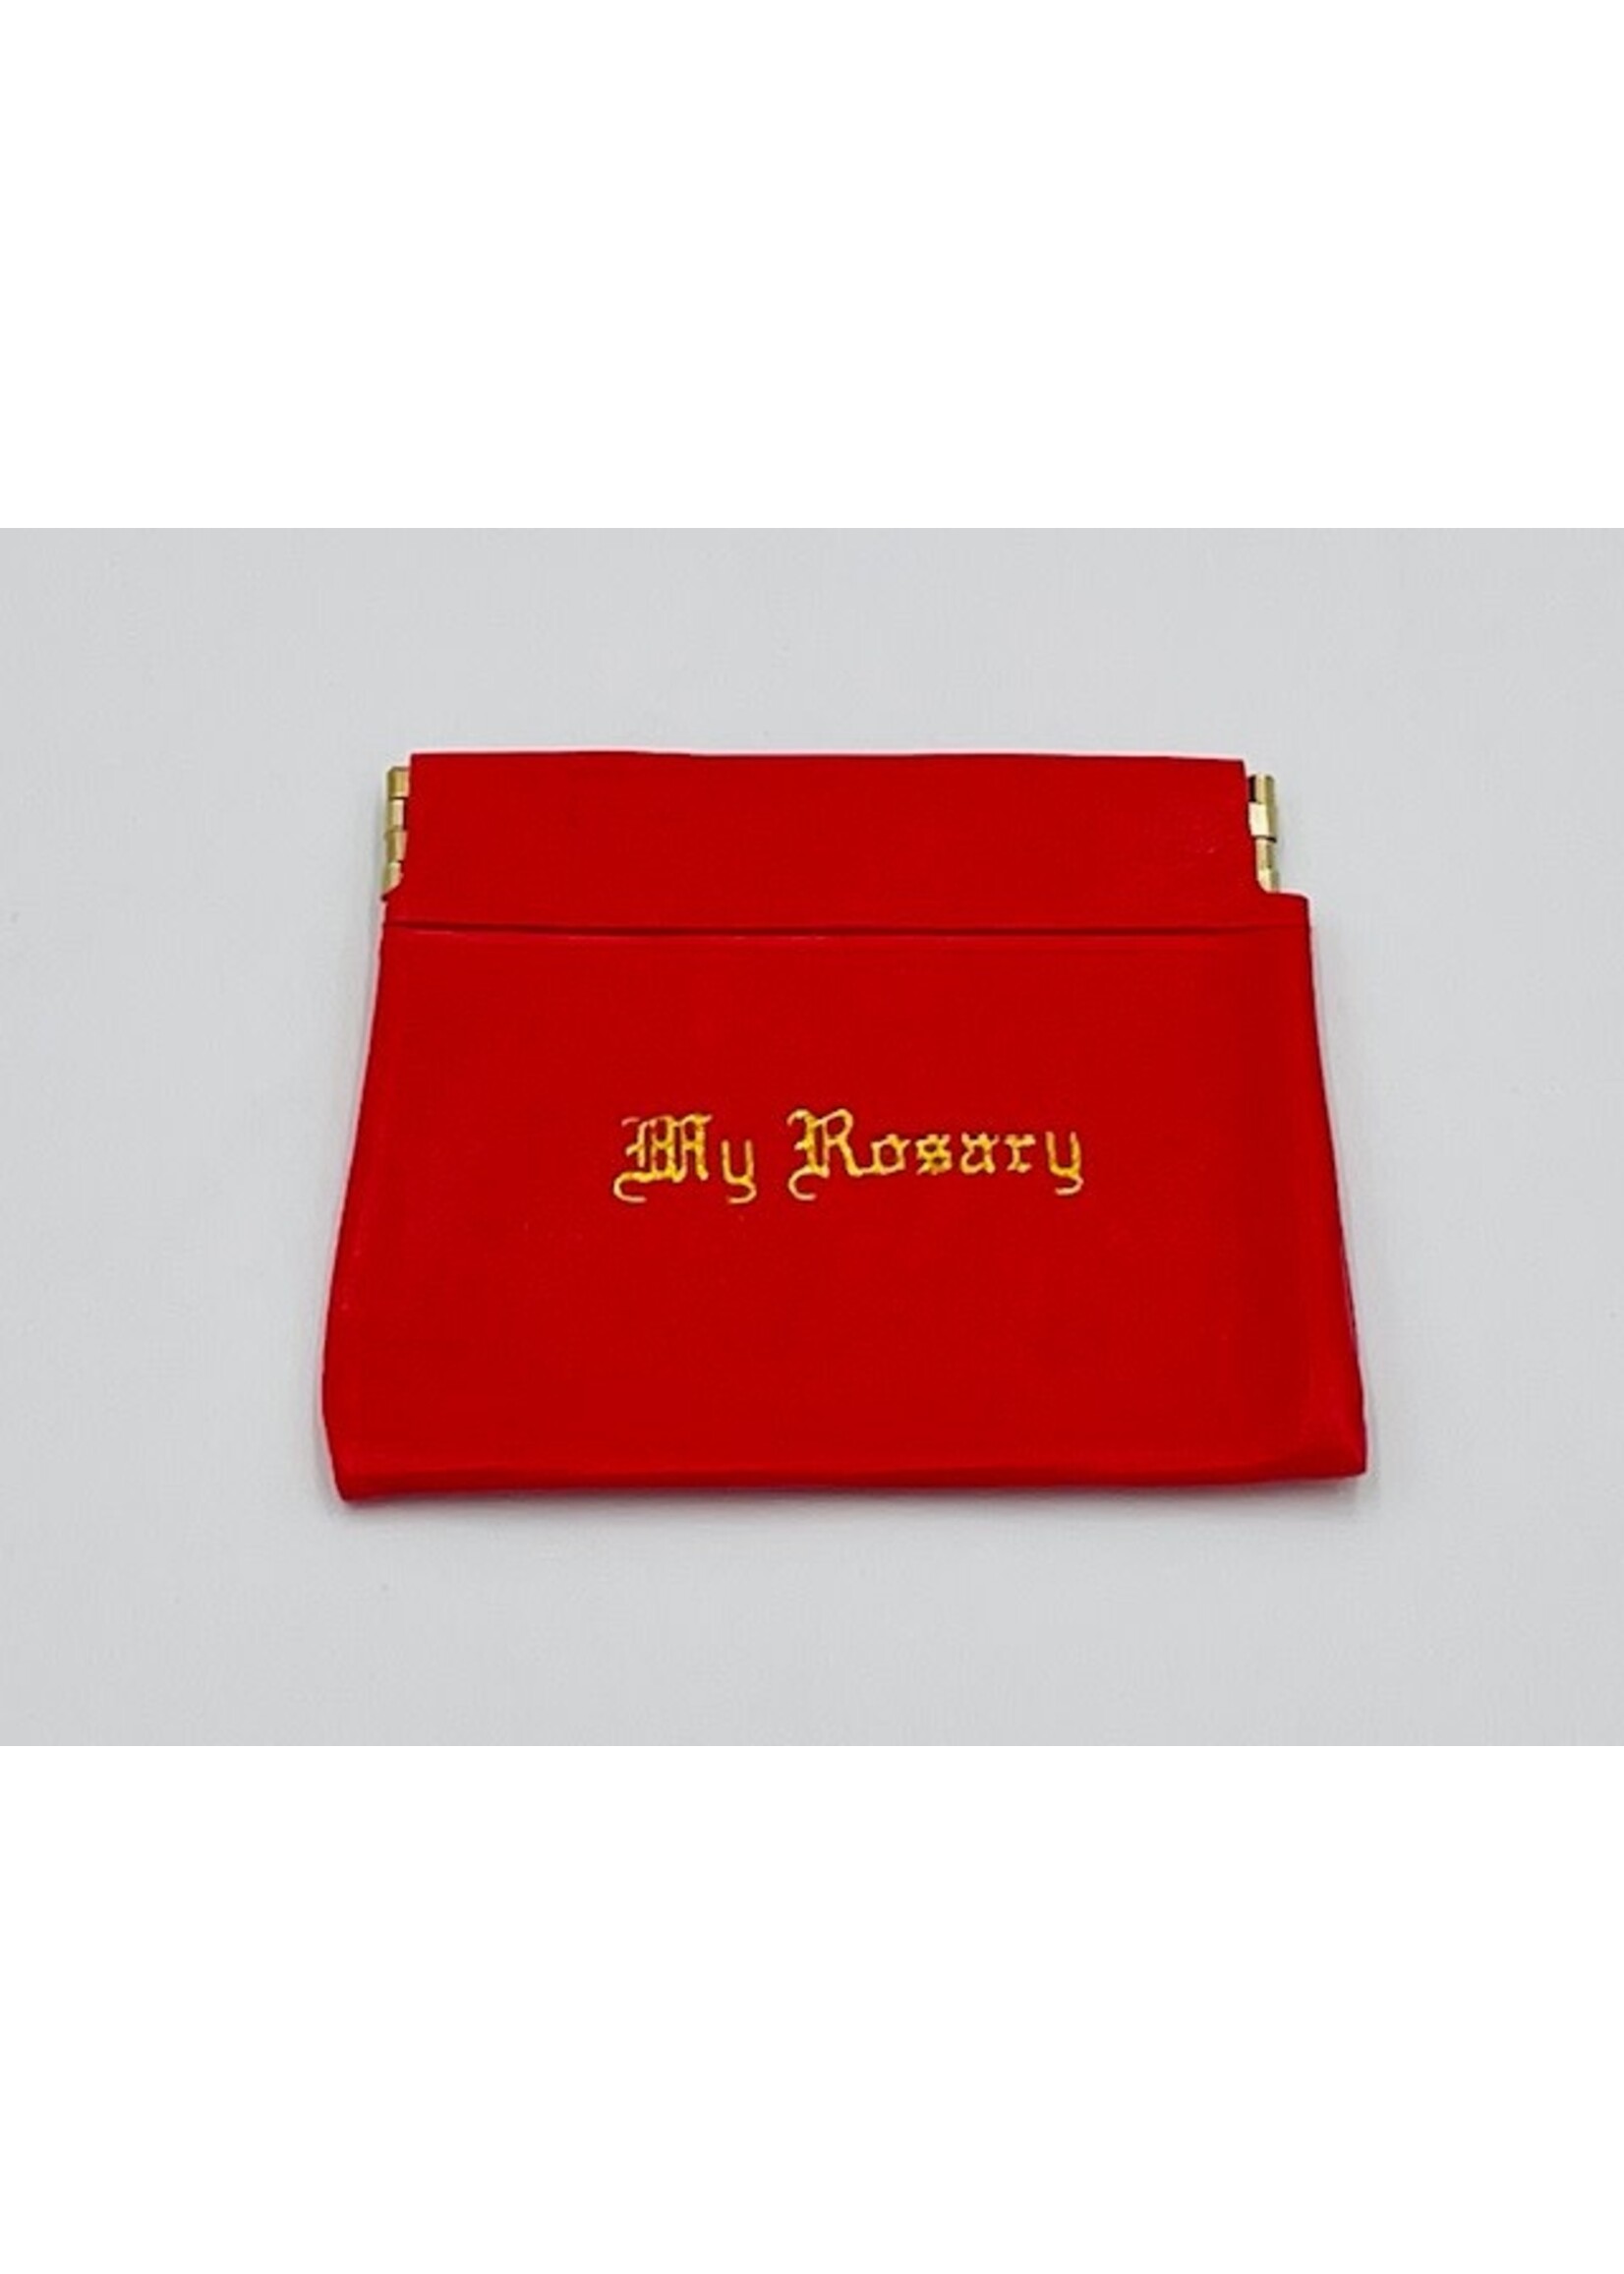 Vinyl "Squeeze" Rosary Case - red